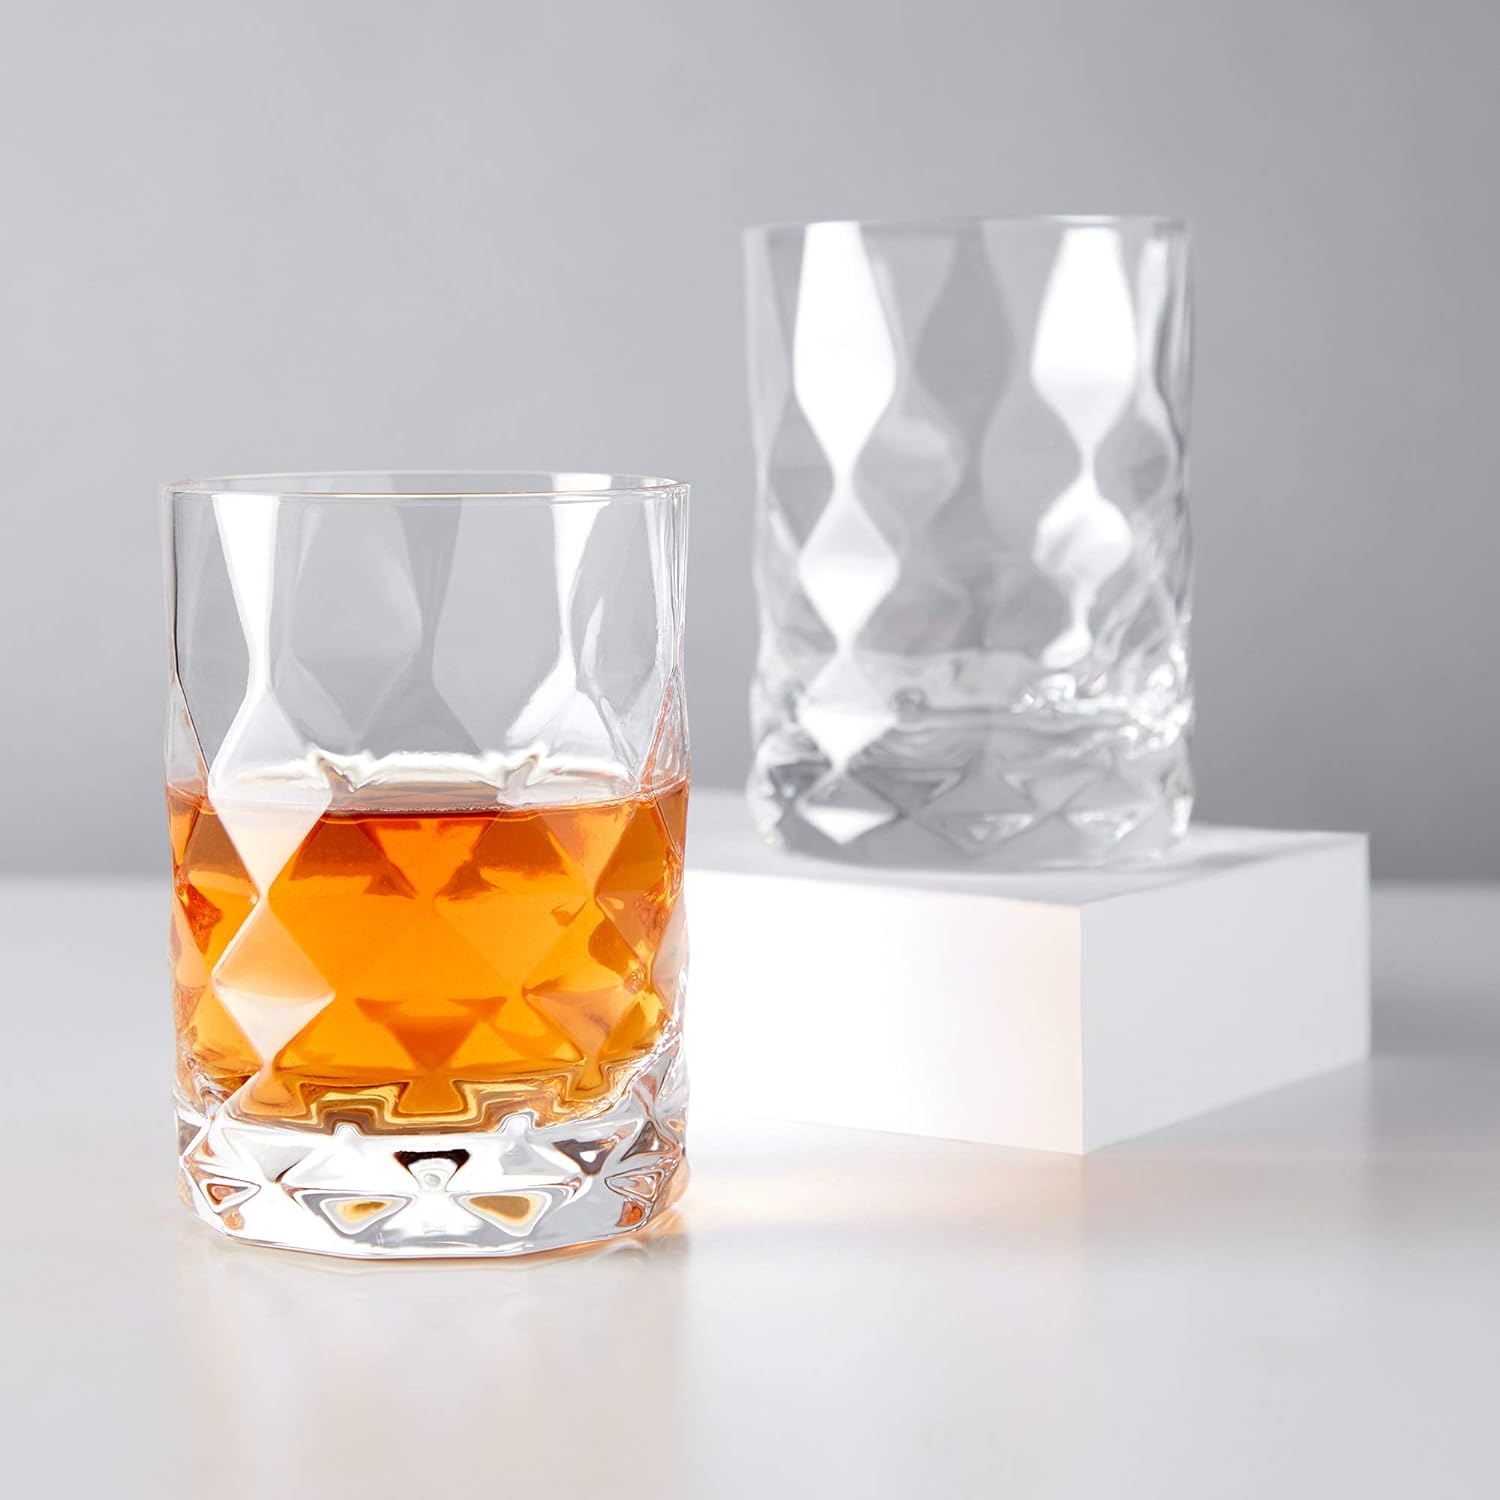 Luxu Whiskey Glasses(Set of 4)-11 oz Sculpted Scotch Glass,Old Fashioned Glasses,Crystal Bourbon Rock Glasses,Large Bar Glasses,Unique Glassware